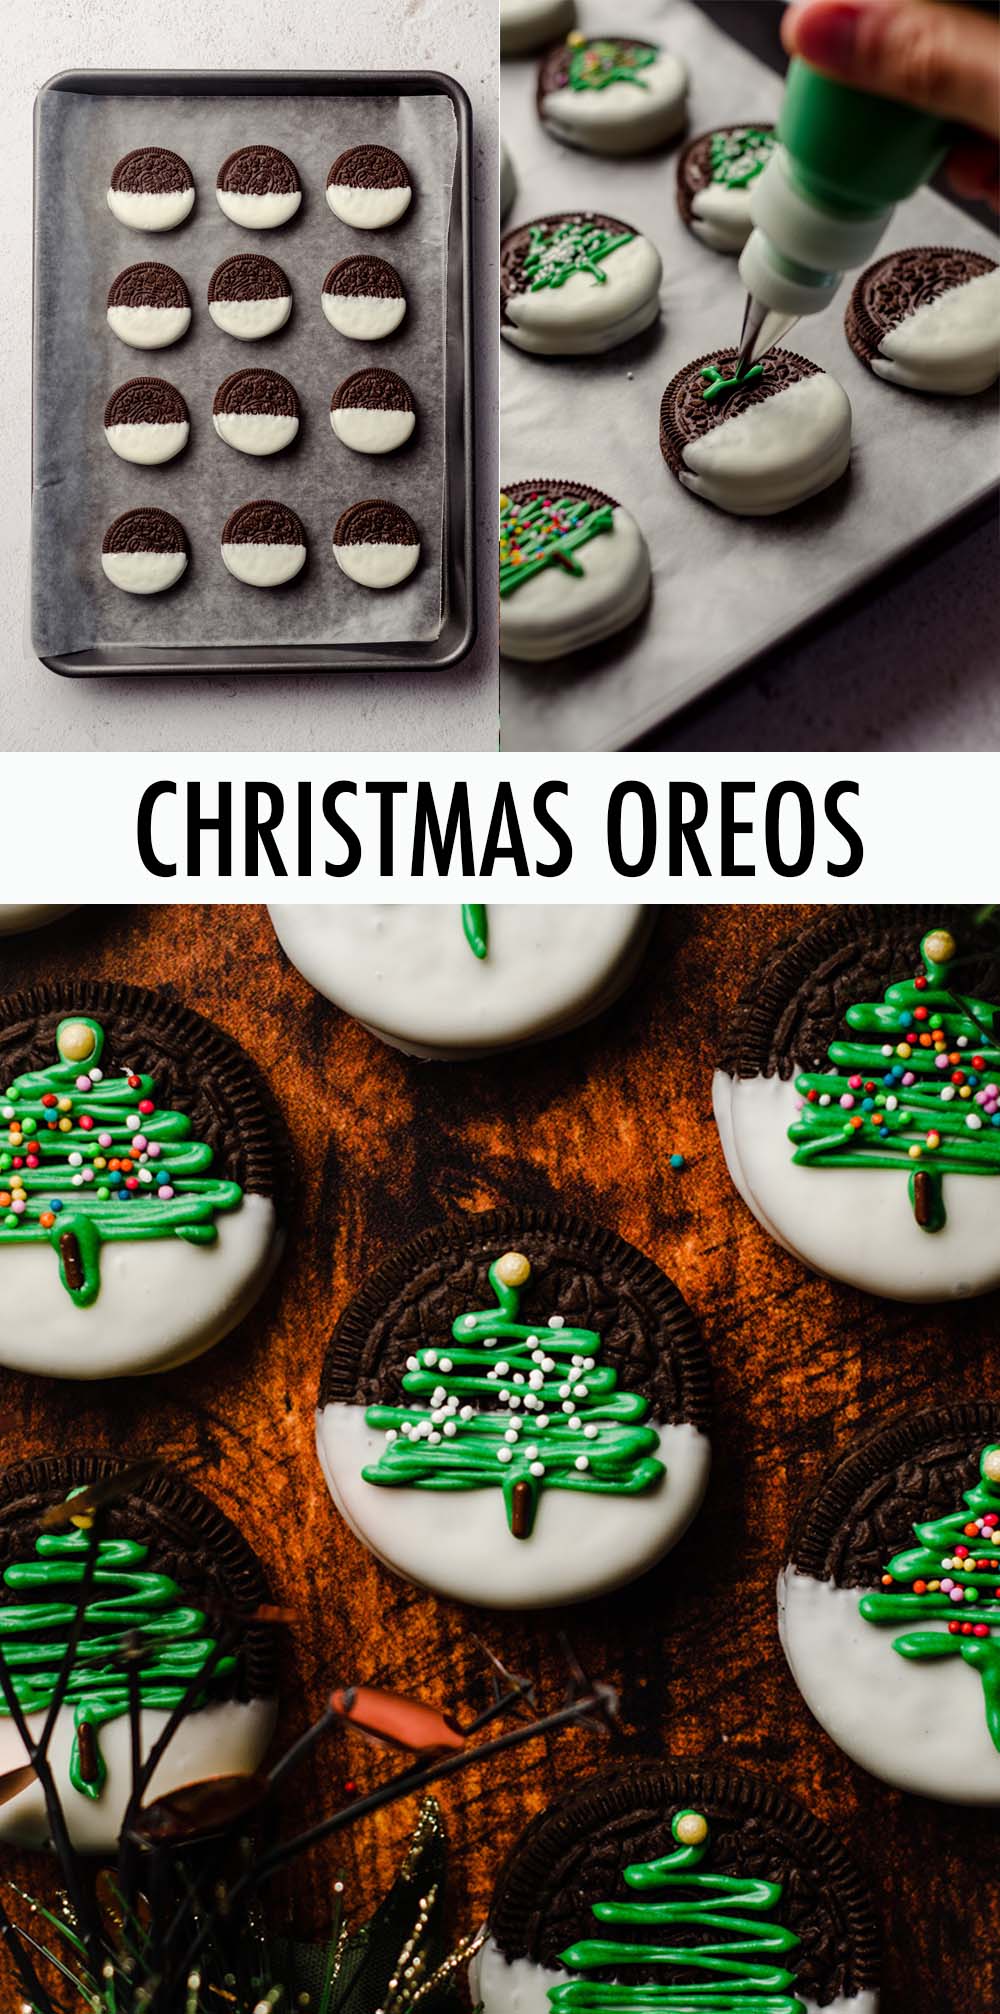 These delightful Christmas Oreos are the perfect holiday treat! Store bought Oreo cookies are dipped into melted white chocolate, decorated with a simple (yet adorable) Christmas tree motif, then sprinkled with colorful nonpareils. via @frshaprilflours